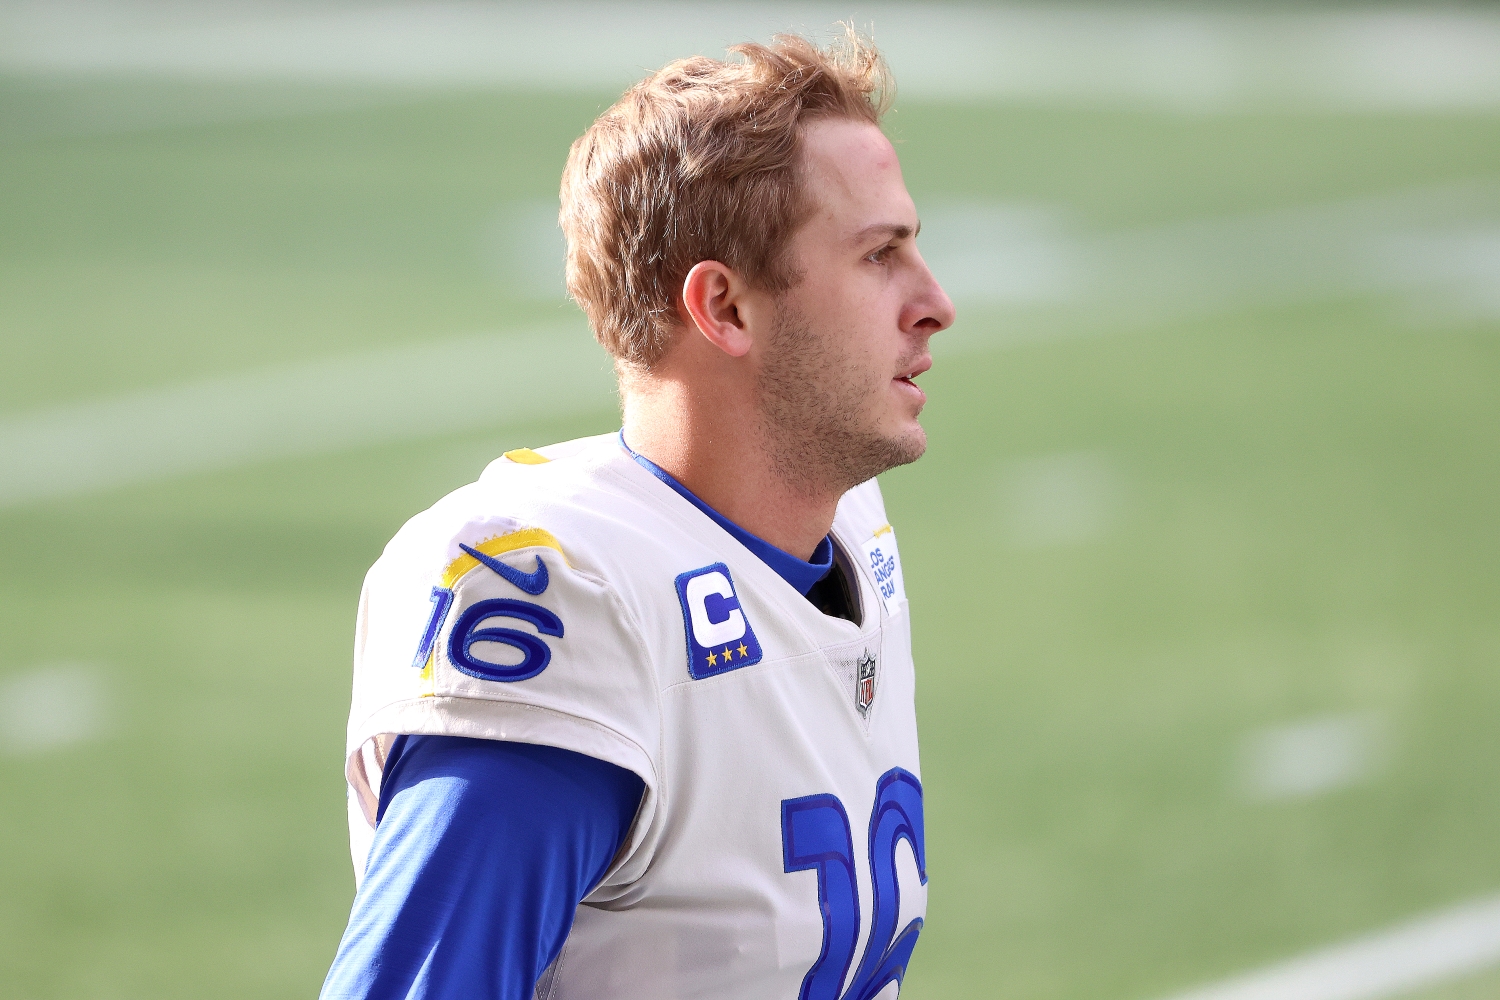 Jared Goff of the LA Rams looks toward the field before a playoff game against the Seattle Seahawks.